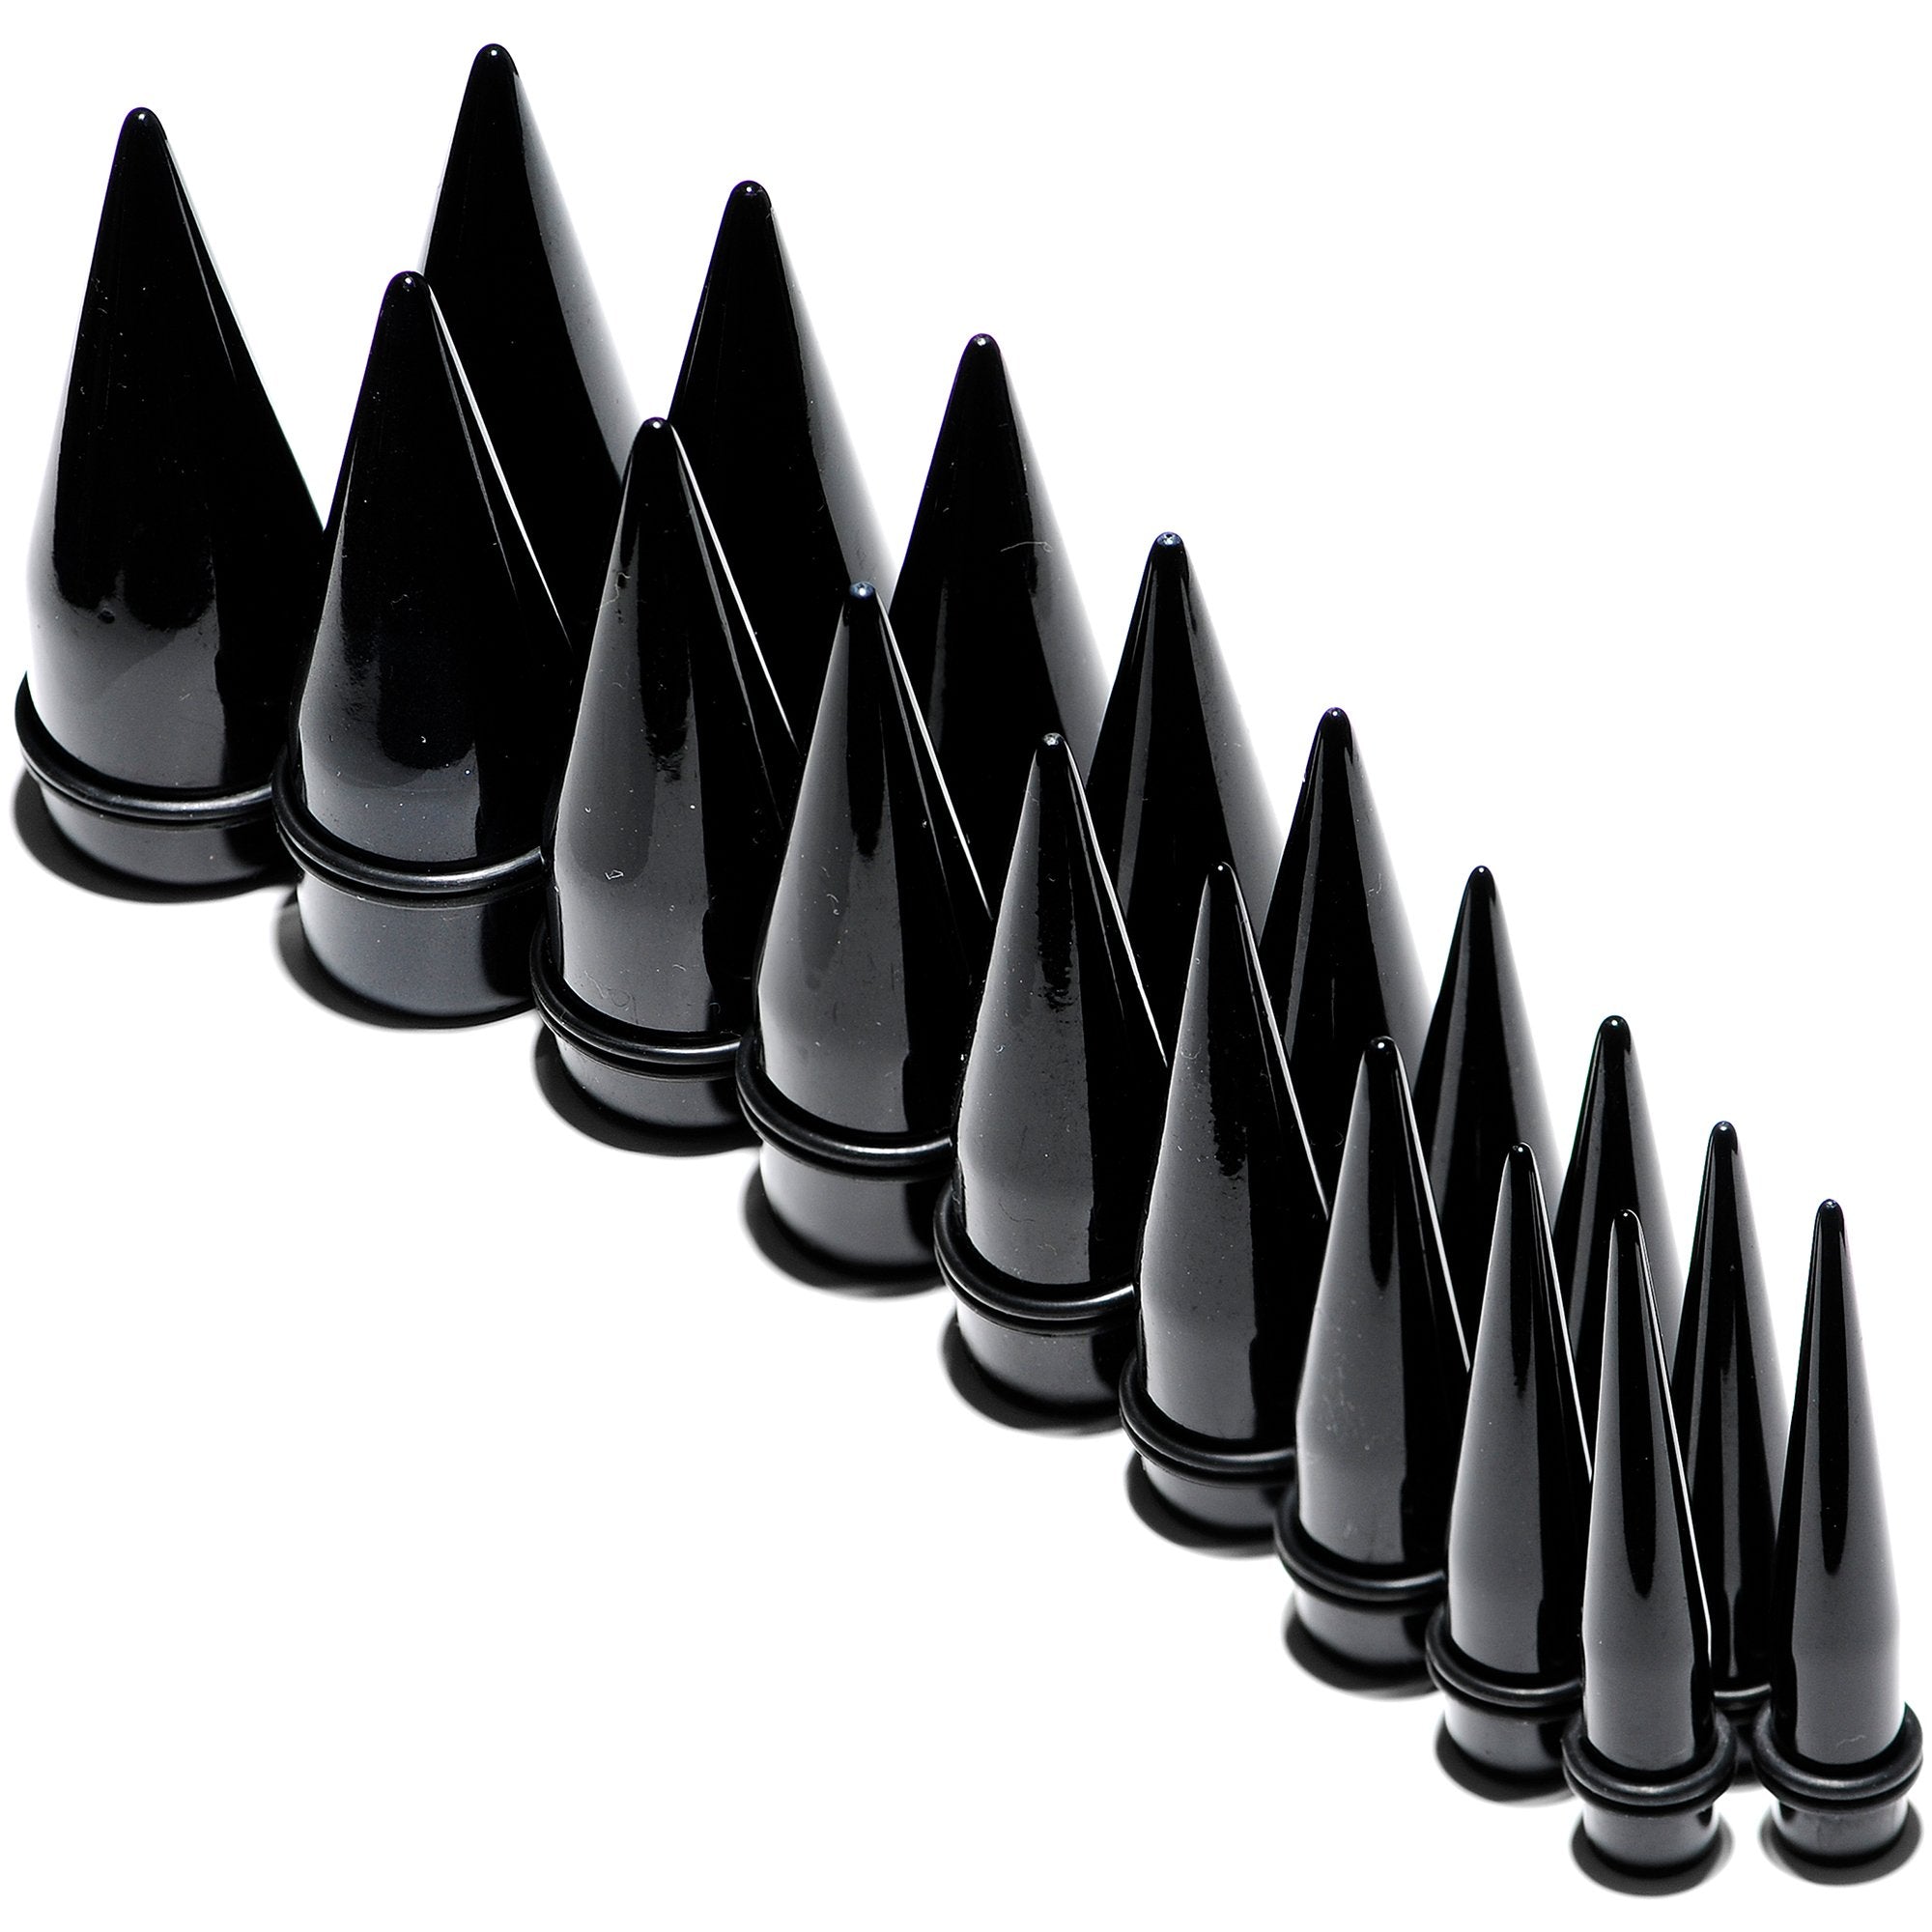 00 Gauge to 1 inch 18 Piece Black Acrylic Ear Stretching Taper Kit